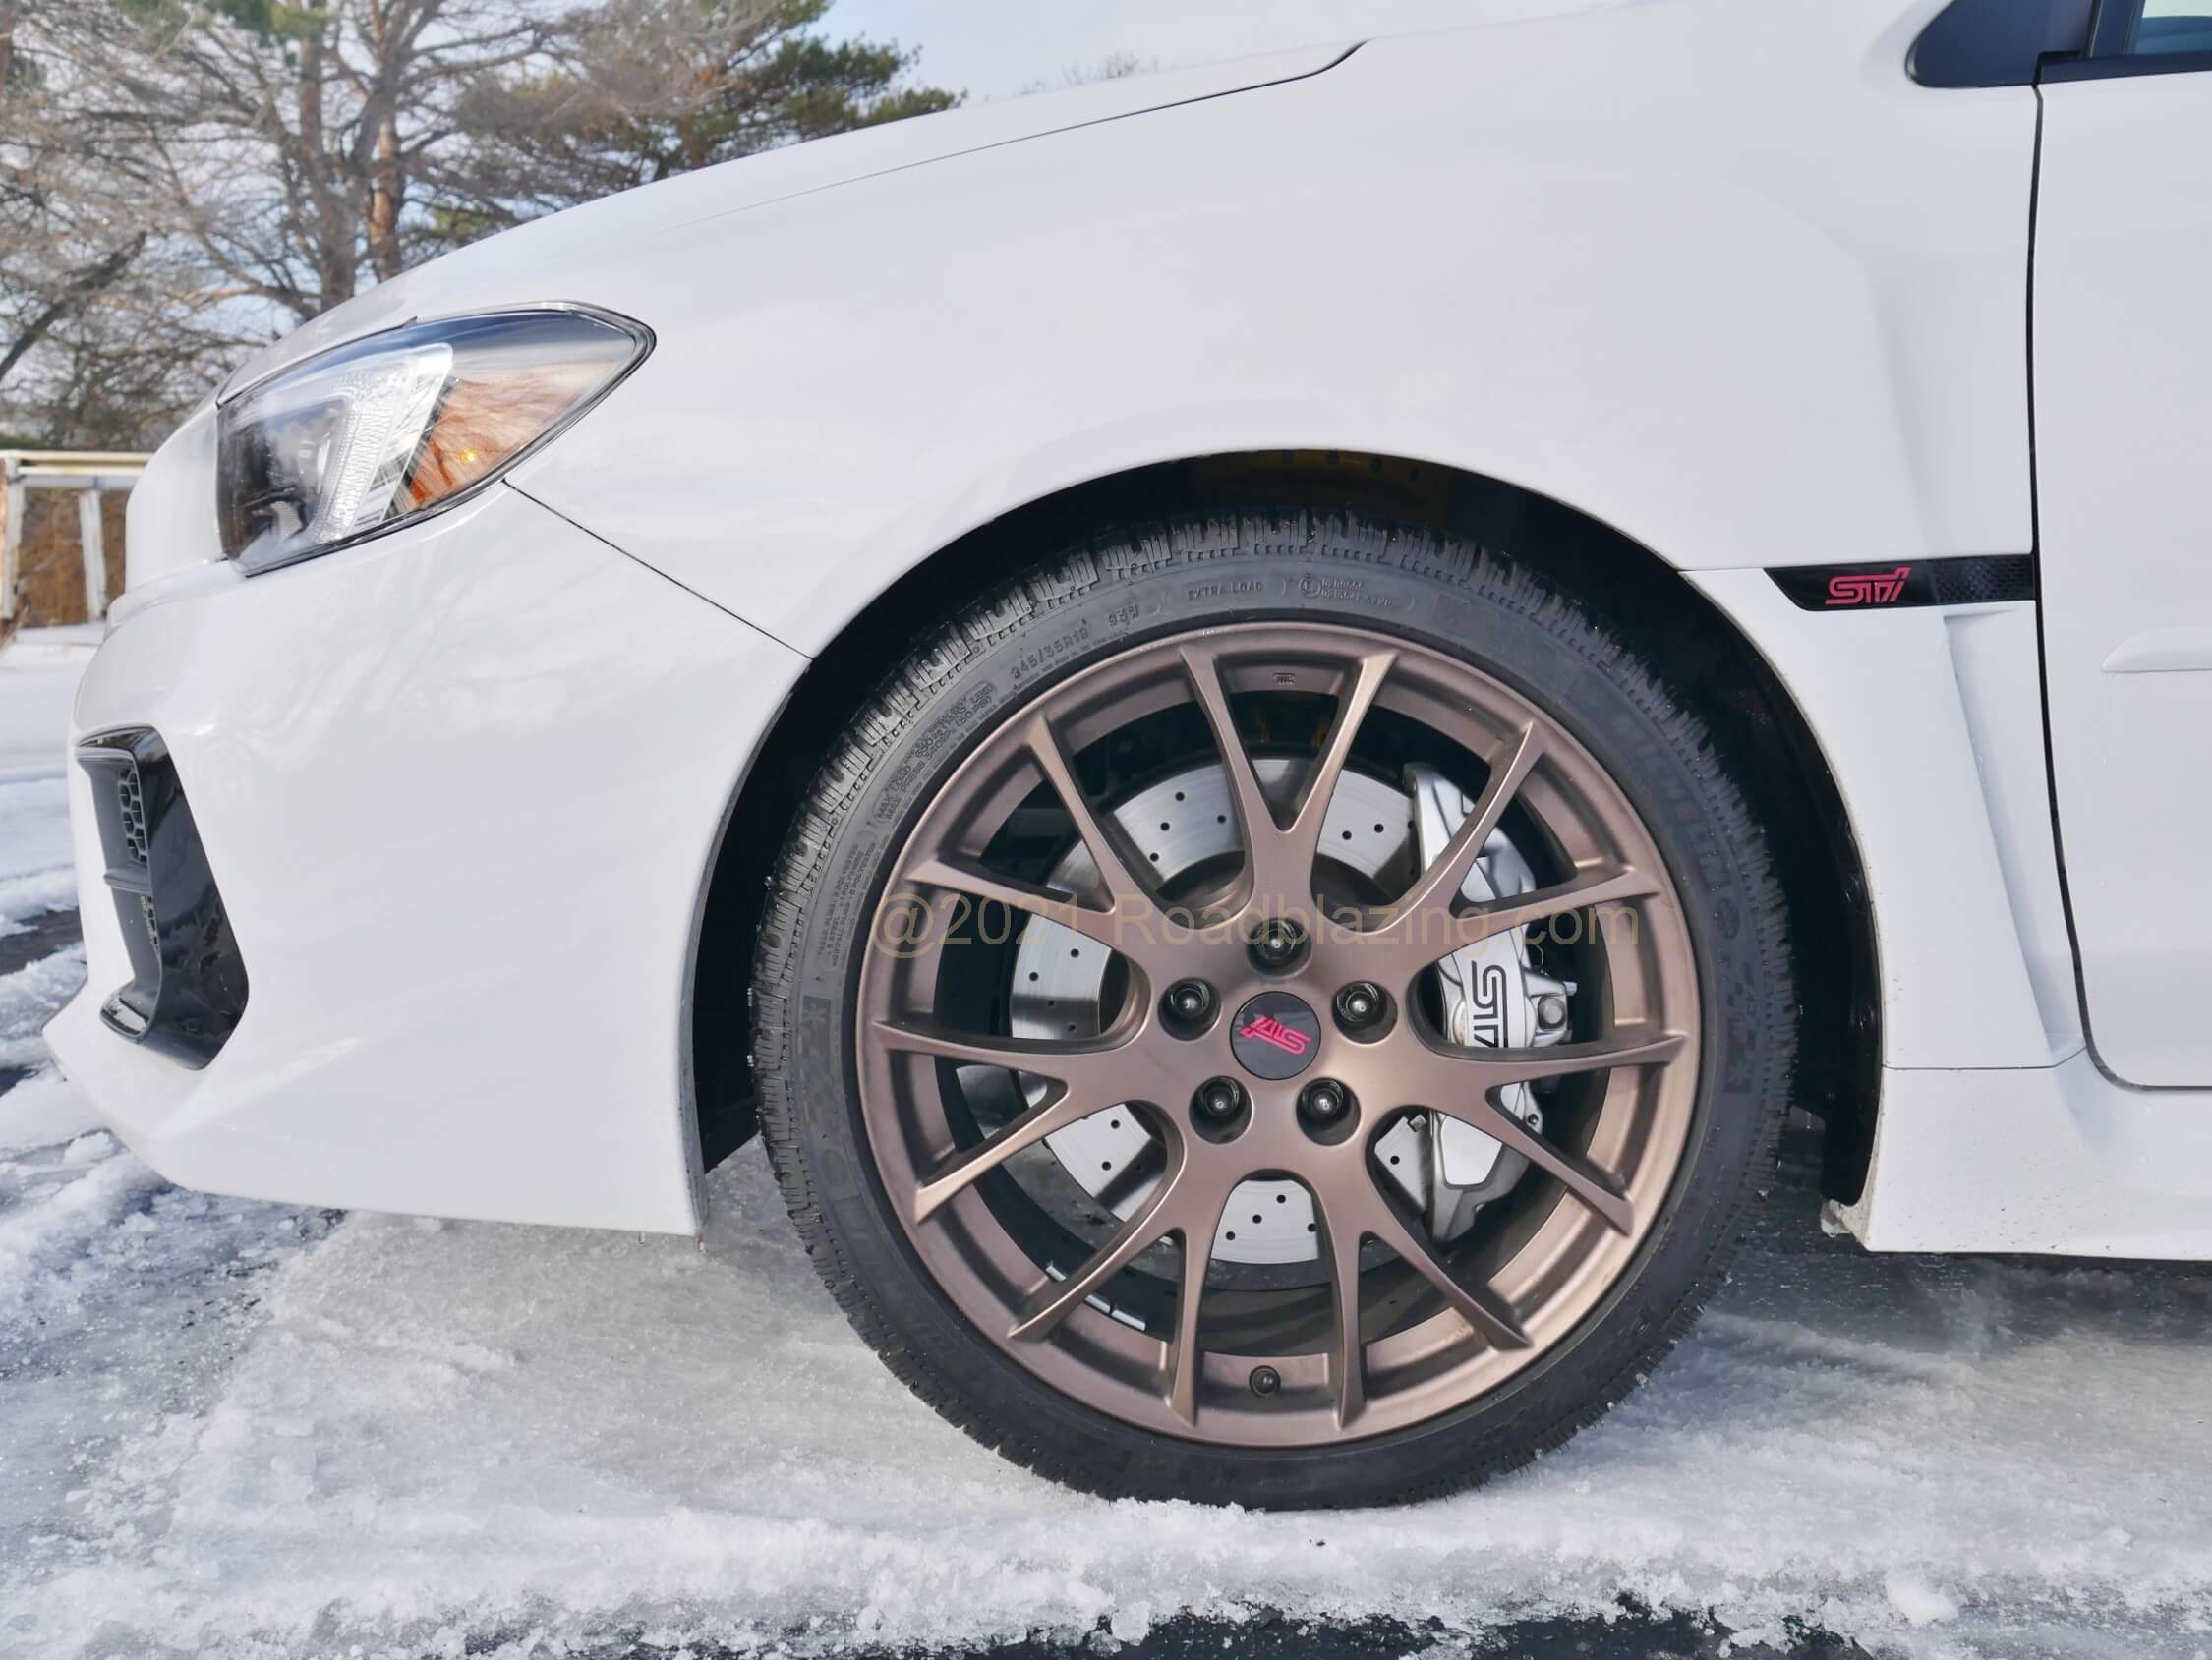 2020 Subaru WRX STI: Bilstein Sport dampers deliver taught body control w/o excessive harshness. Cross-drilled brake rotors fend off heat as 6-piston front Brembo binders clamp down. Tester was fitted with Michelin Alpin performance winter rubber.